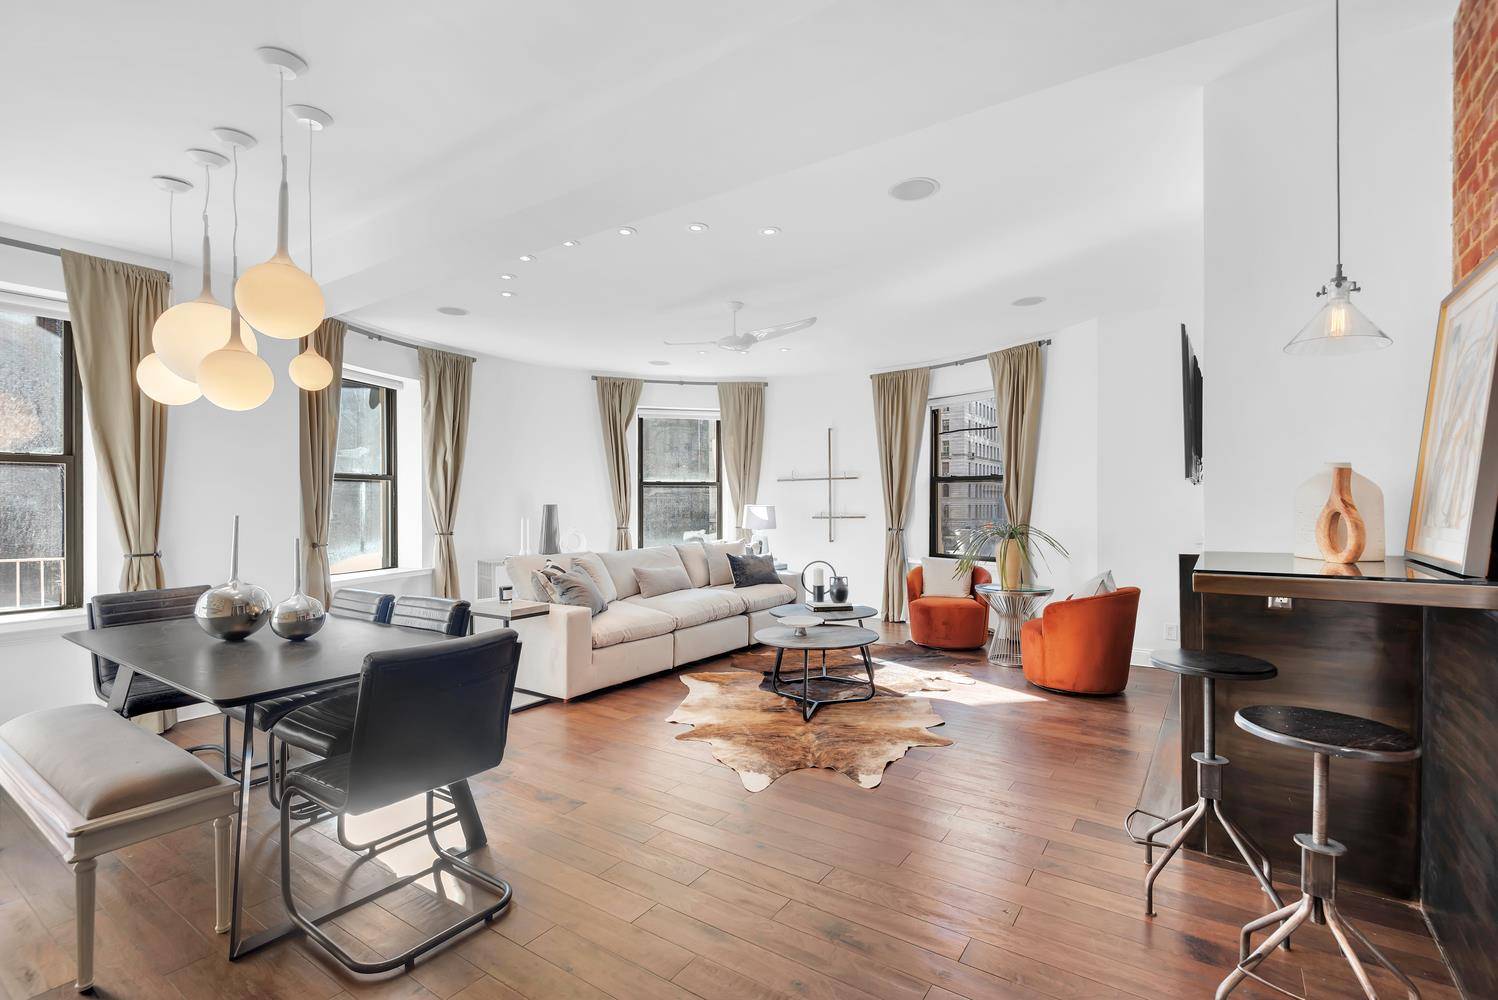 Unit 4A at 425 West End Ave is a grand space in the heart of the Upper West Side.